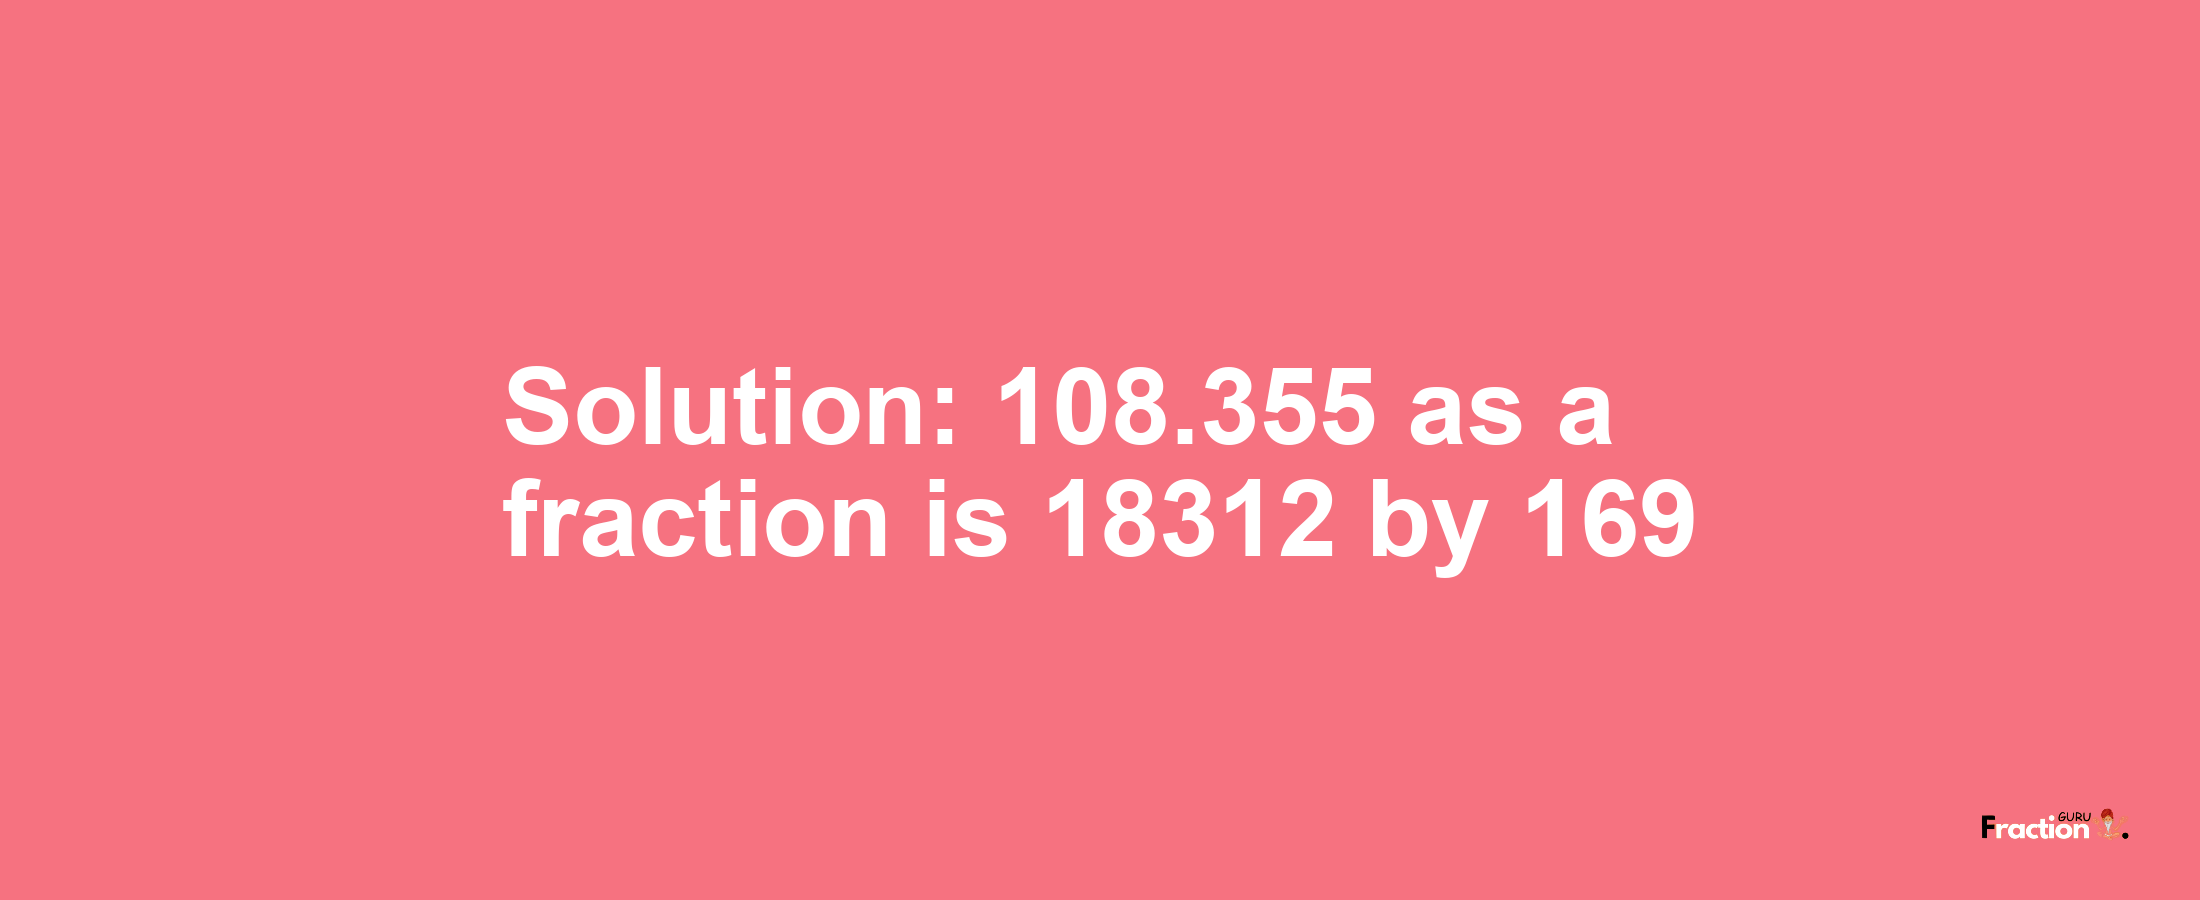 Solution:108.355 as a fraction is 18312/169